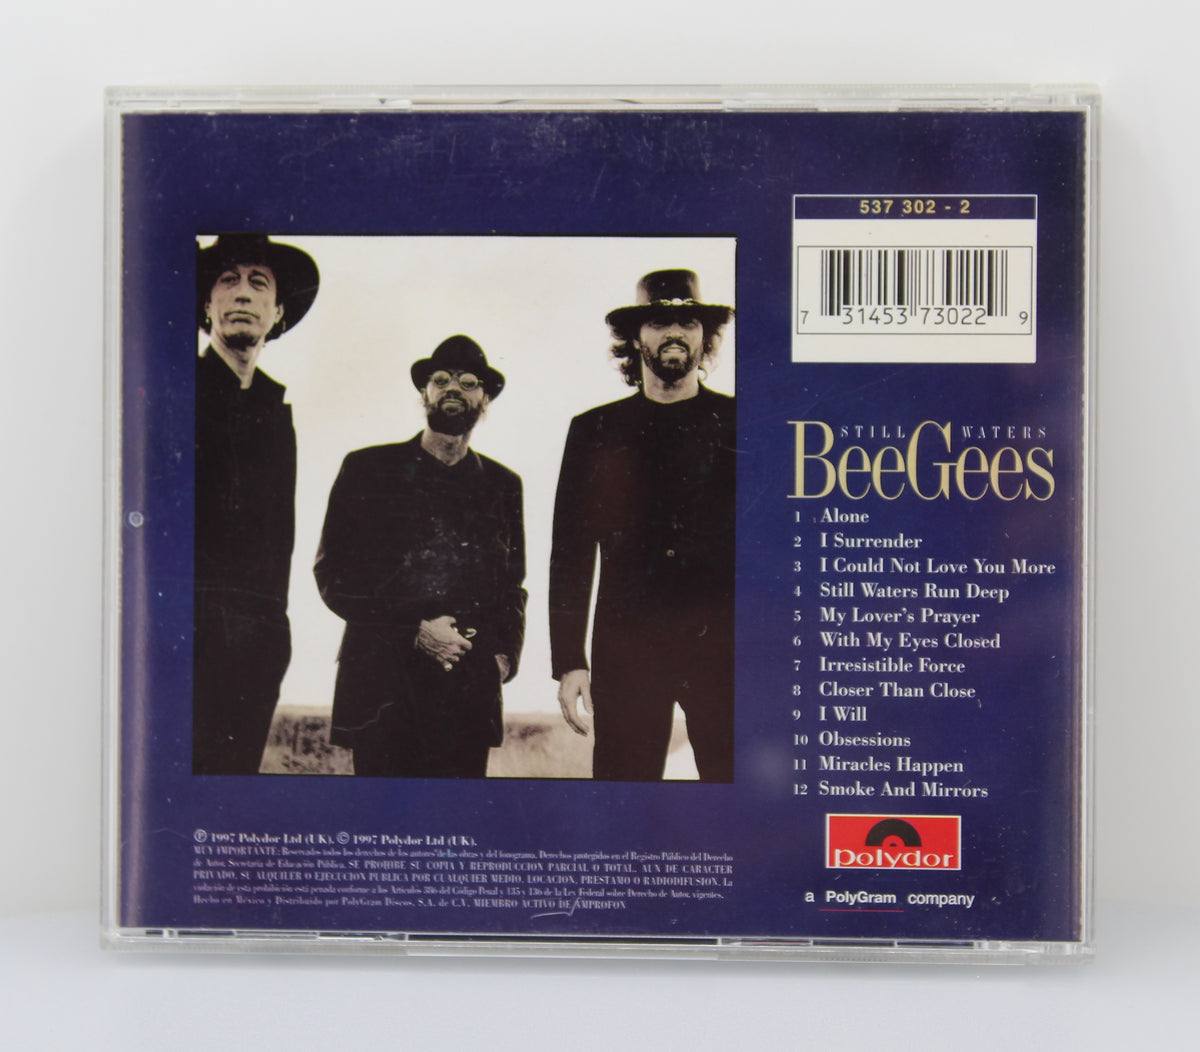 Bee Gees - Still Waters, CD, Album. Mexico 1997